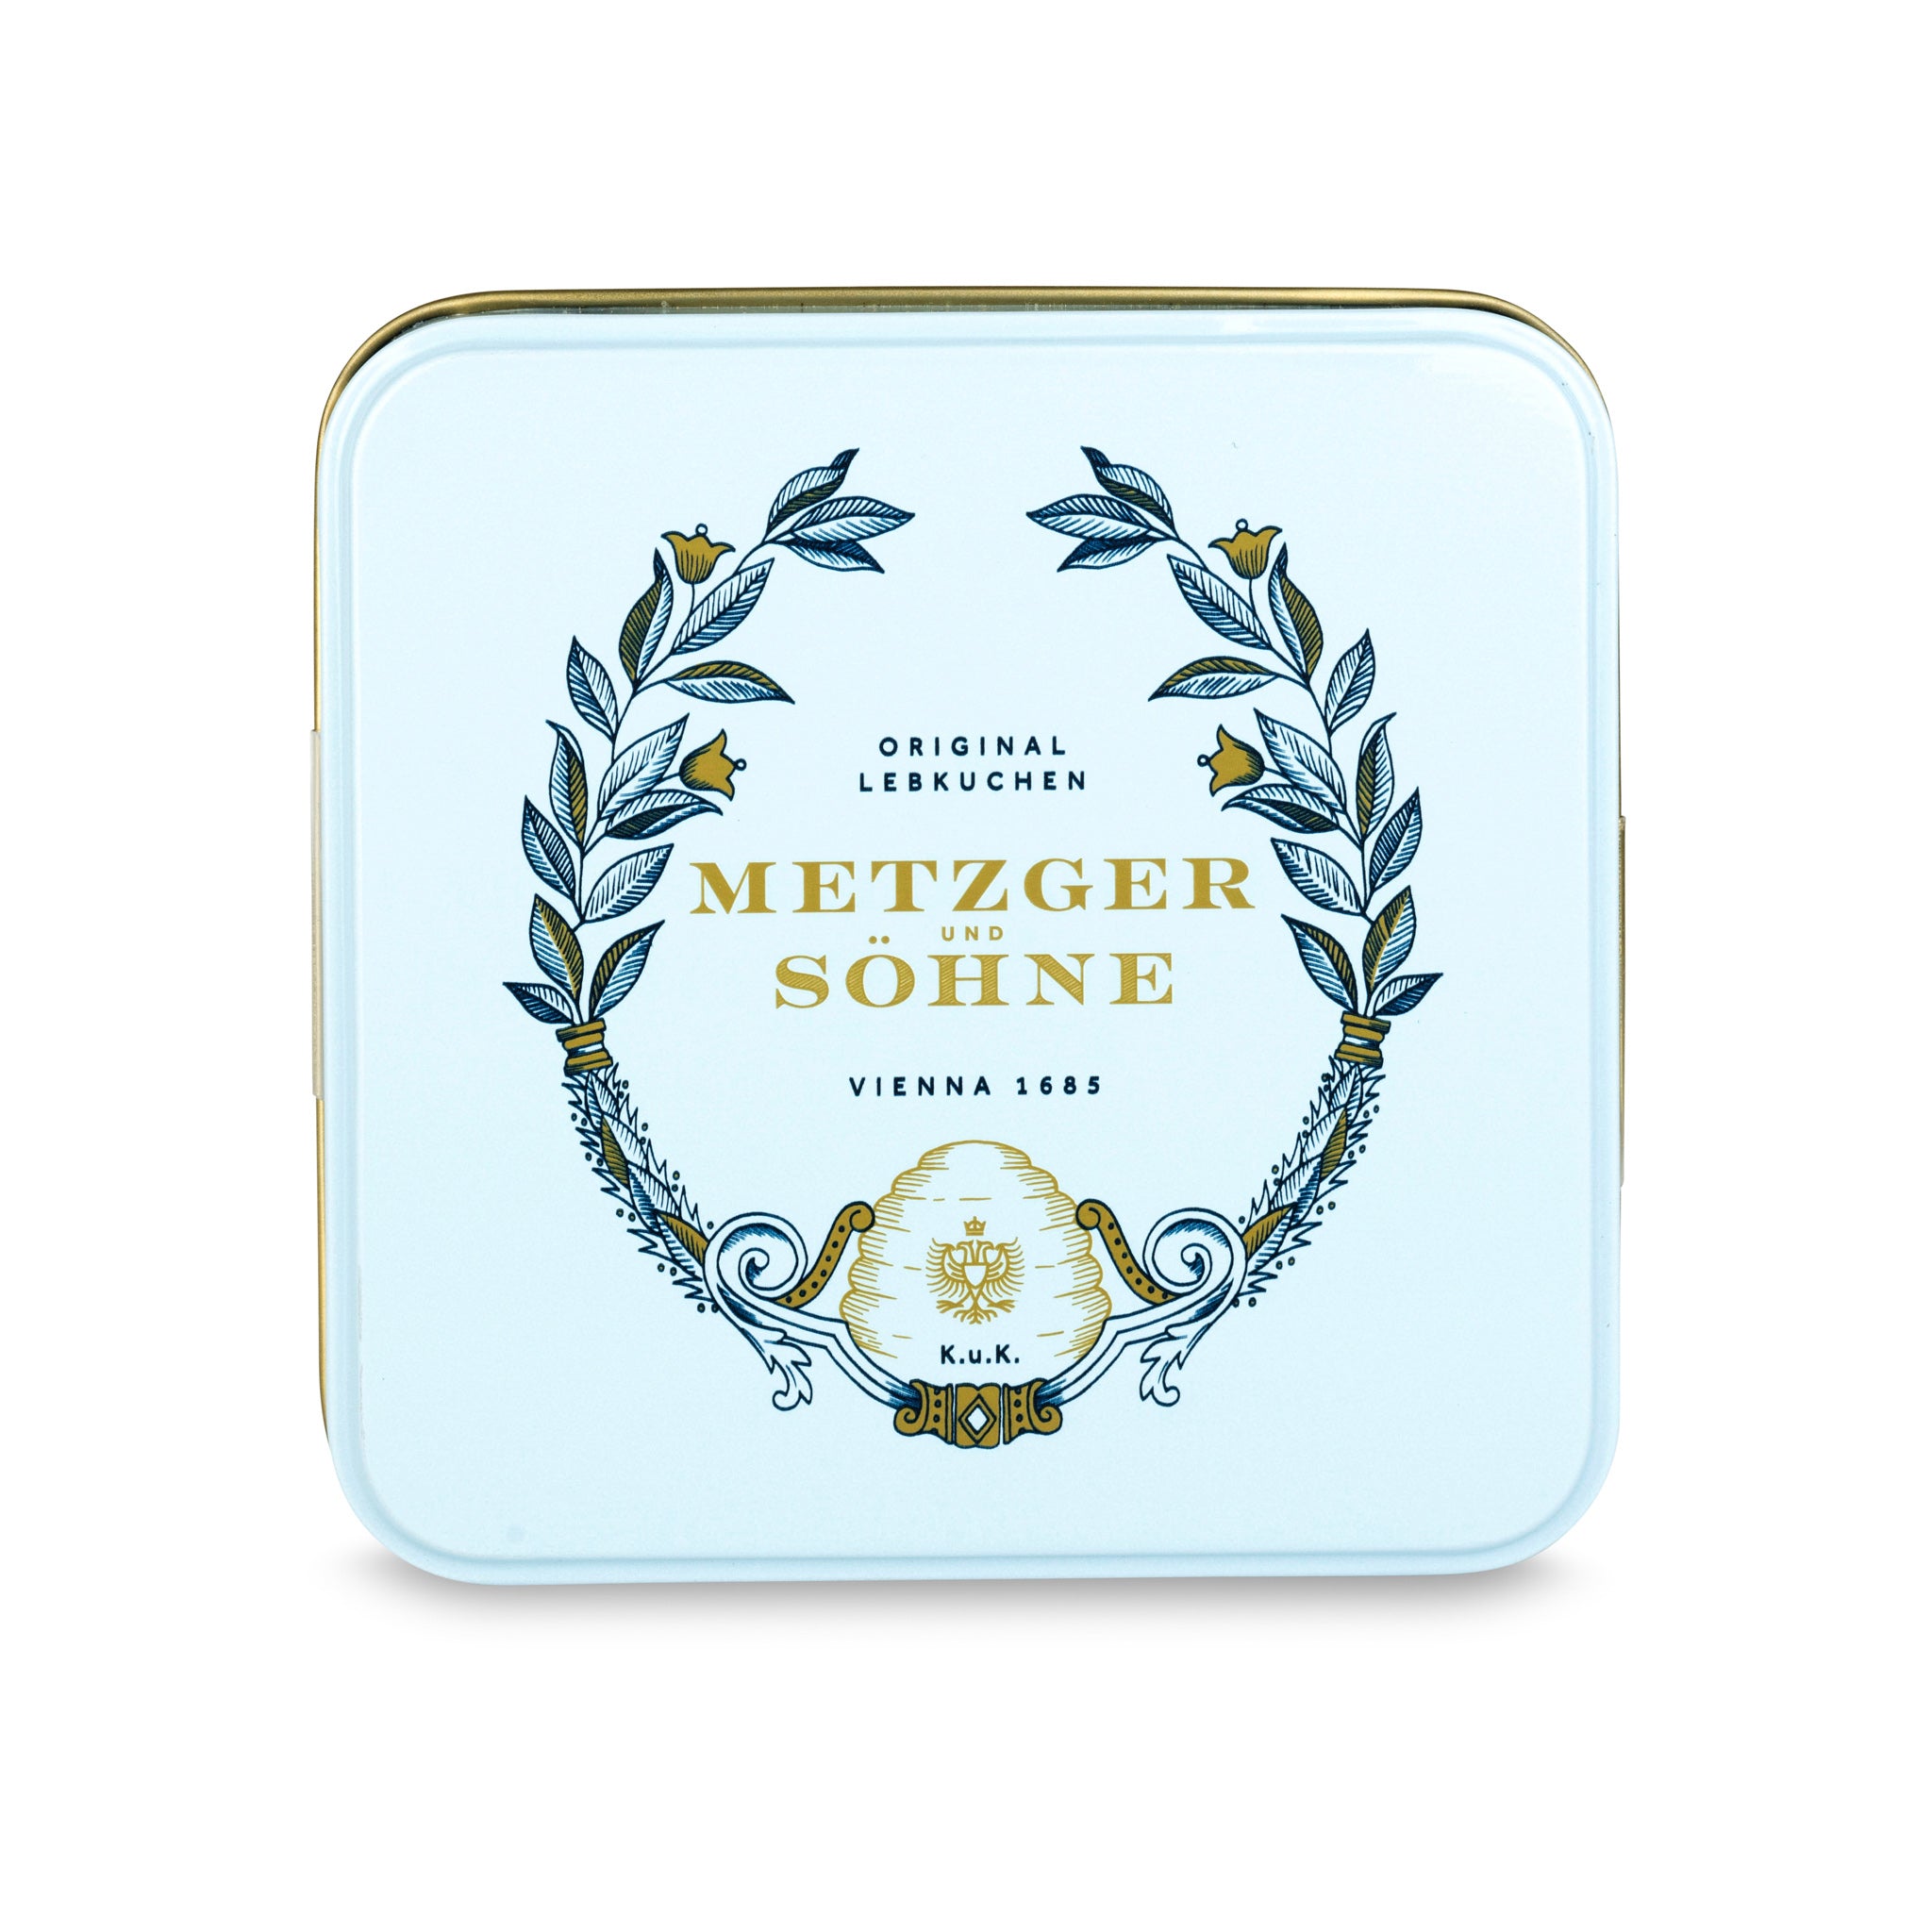 A perfect gift for a special occasion. Metzger's signature luxury tin in ice blue, filled with with 9 delectable Lebkuchen chocolate pralines. Each praline is layered with Lebkuchen 'honey cake' and filled with marzipan, nuts or fruit jams and jellies, encased in rich chocolate. Suitable for vegetarians.